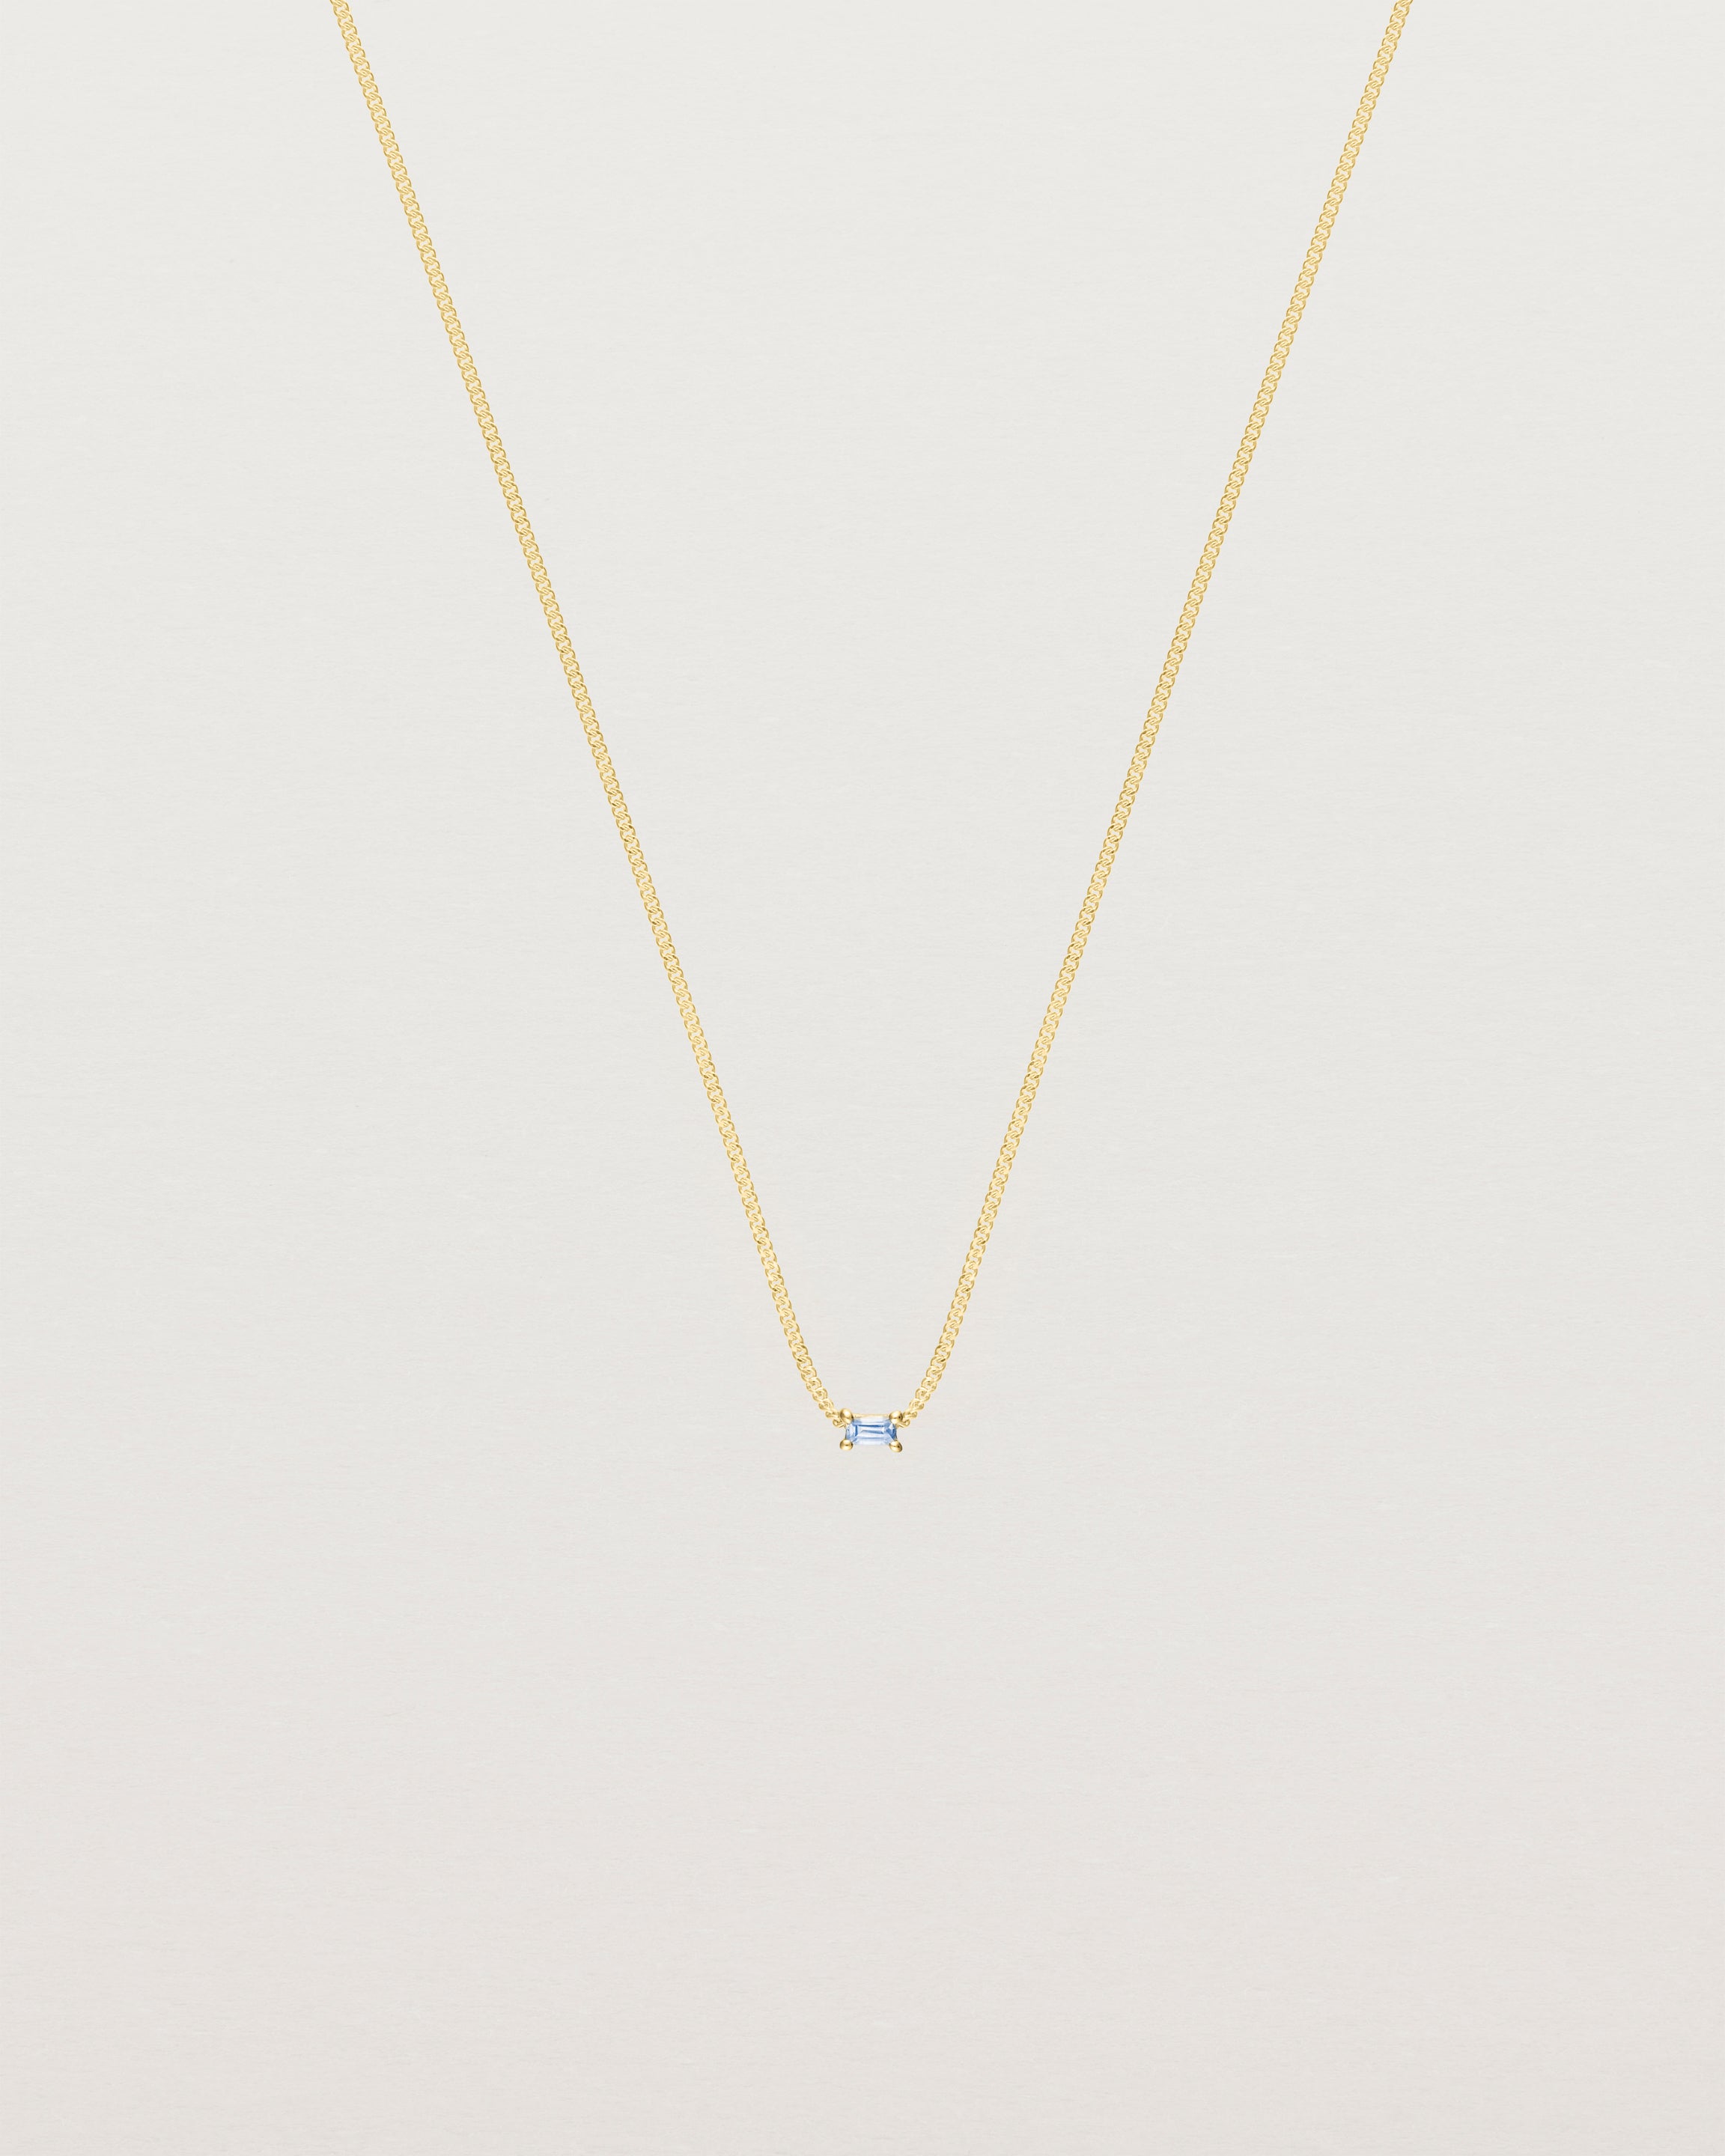 Front view of the Sena Slider Necklace with Pale Blue Sapphire in yellow gold.